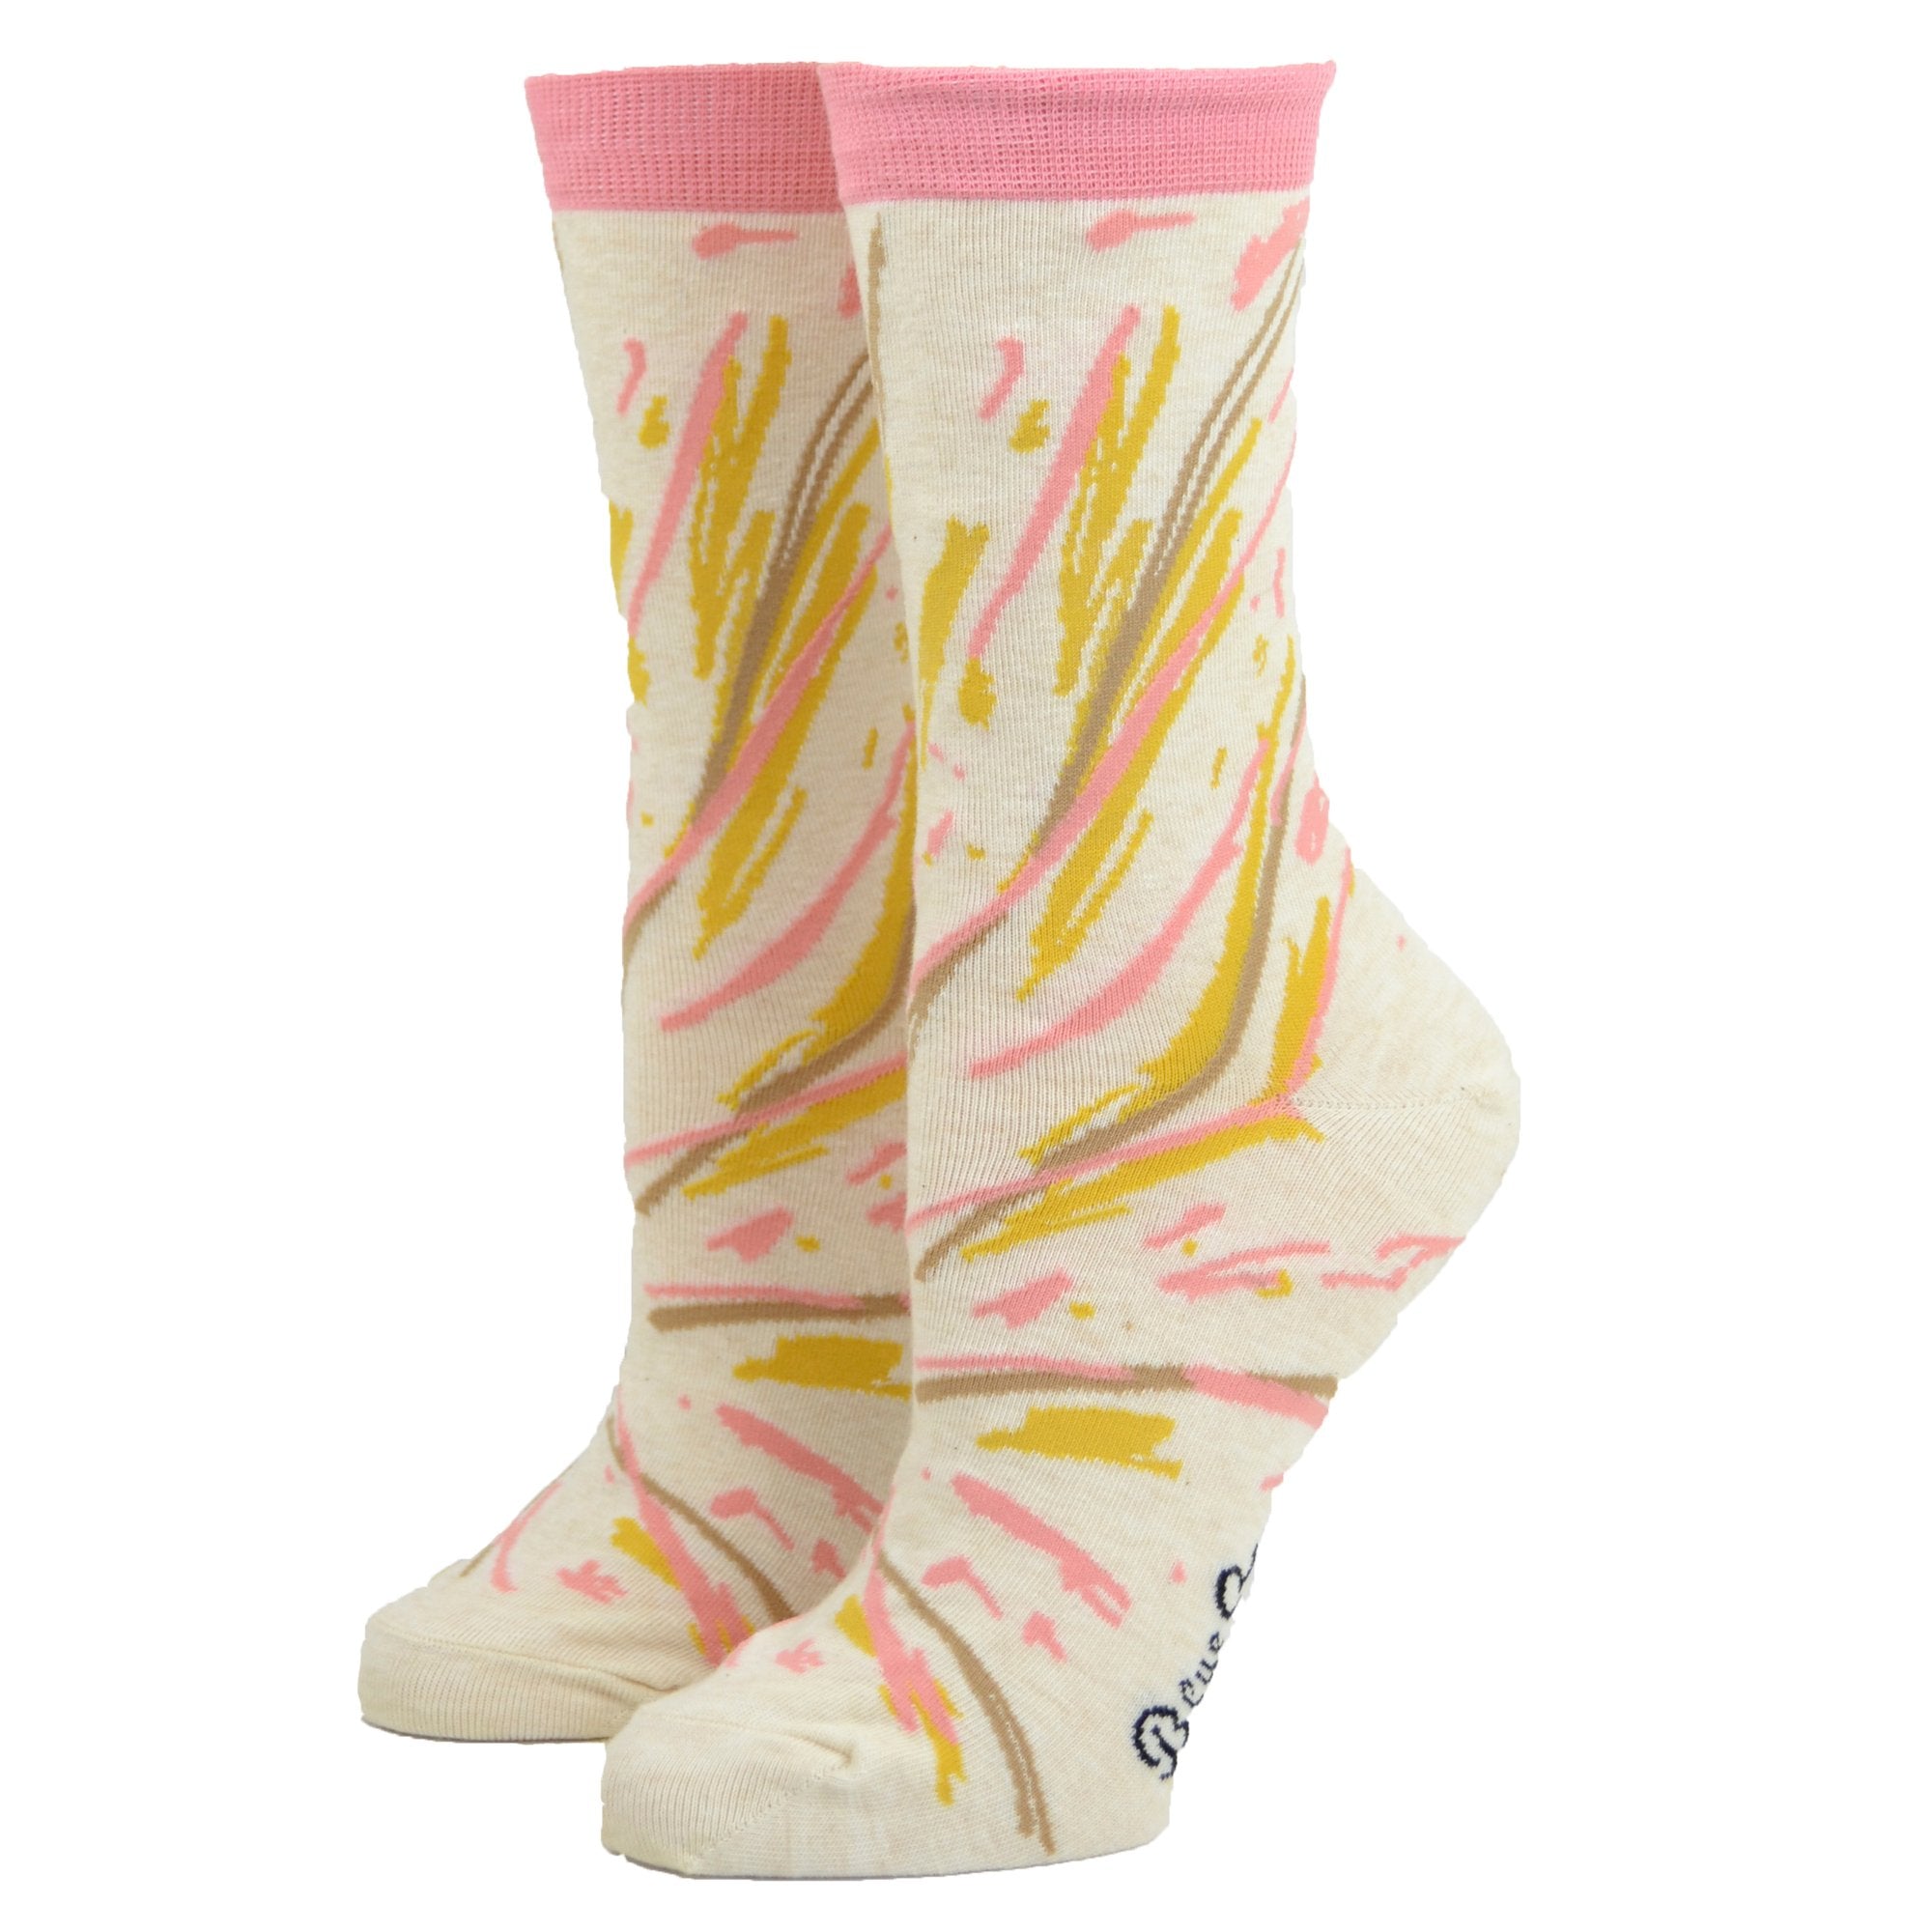 cream socks with yellow and pink lines